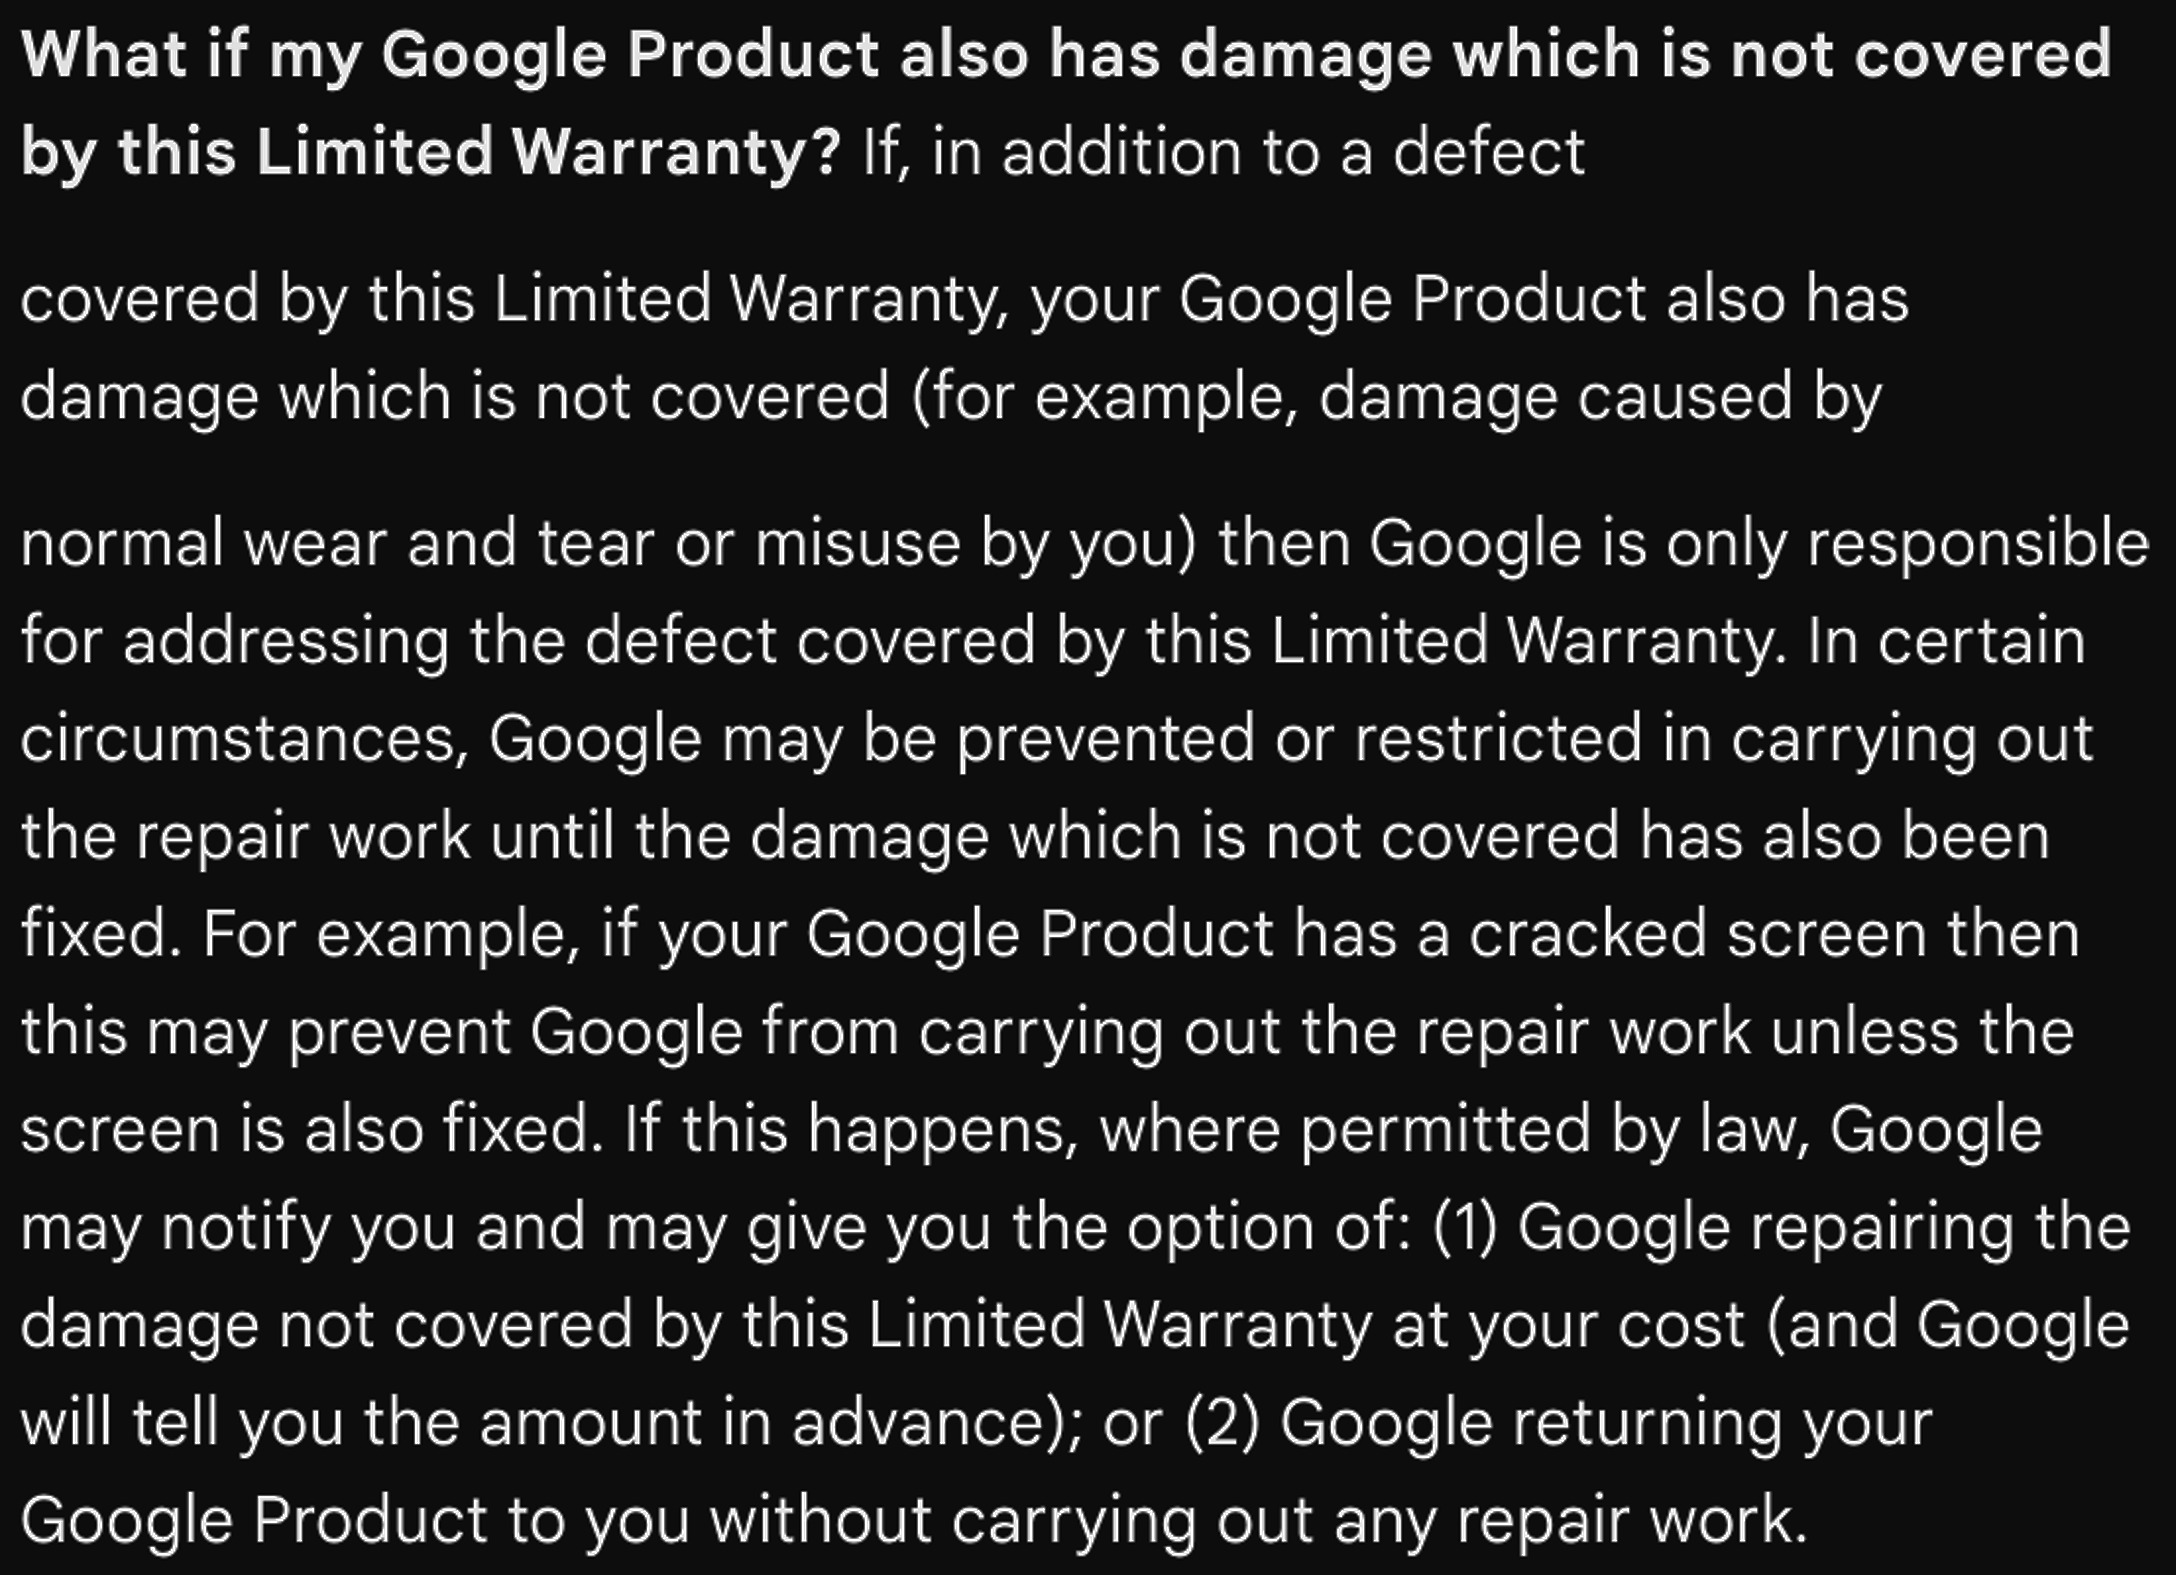 Google repair policy for devices.